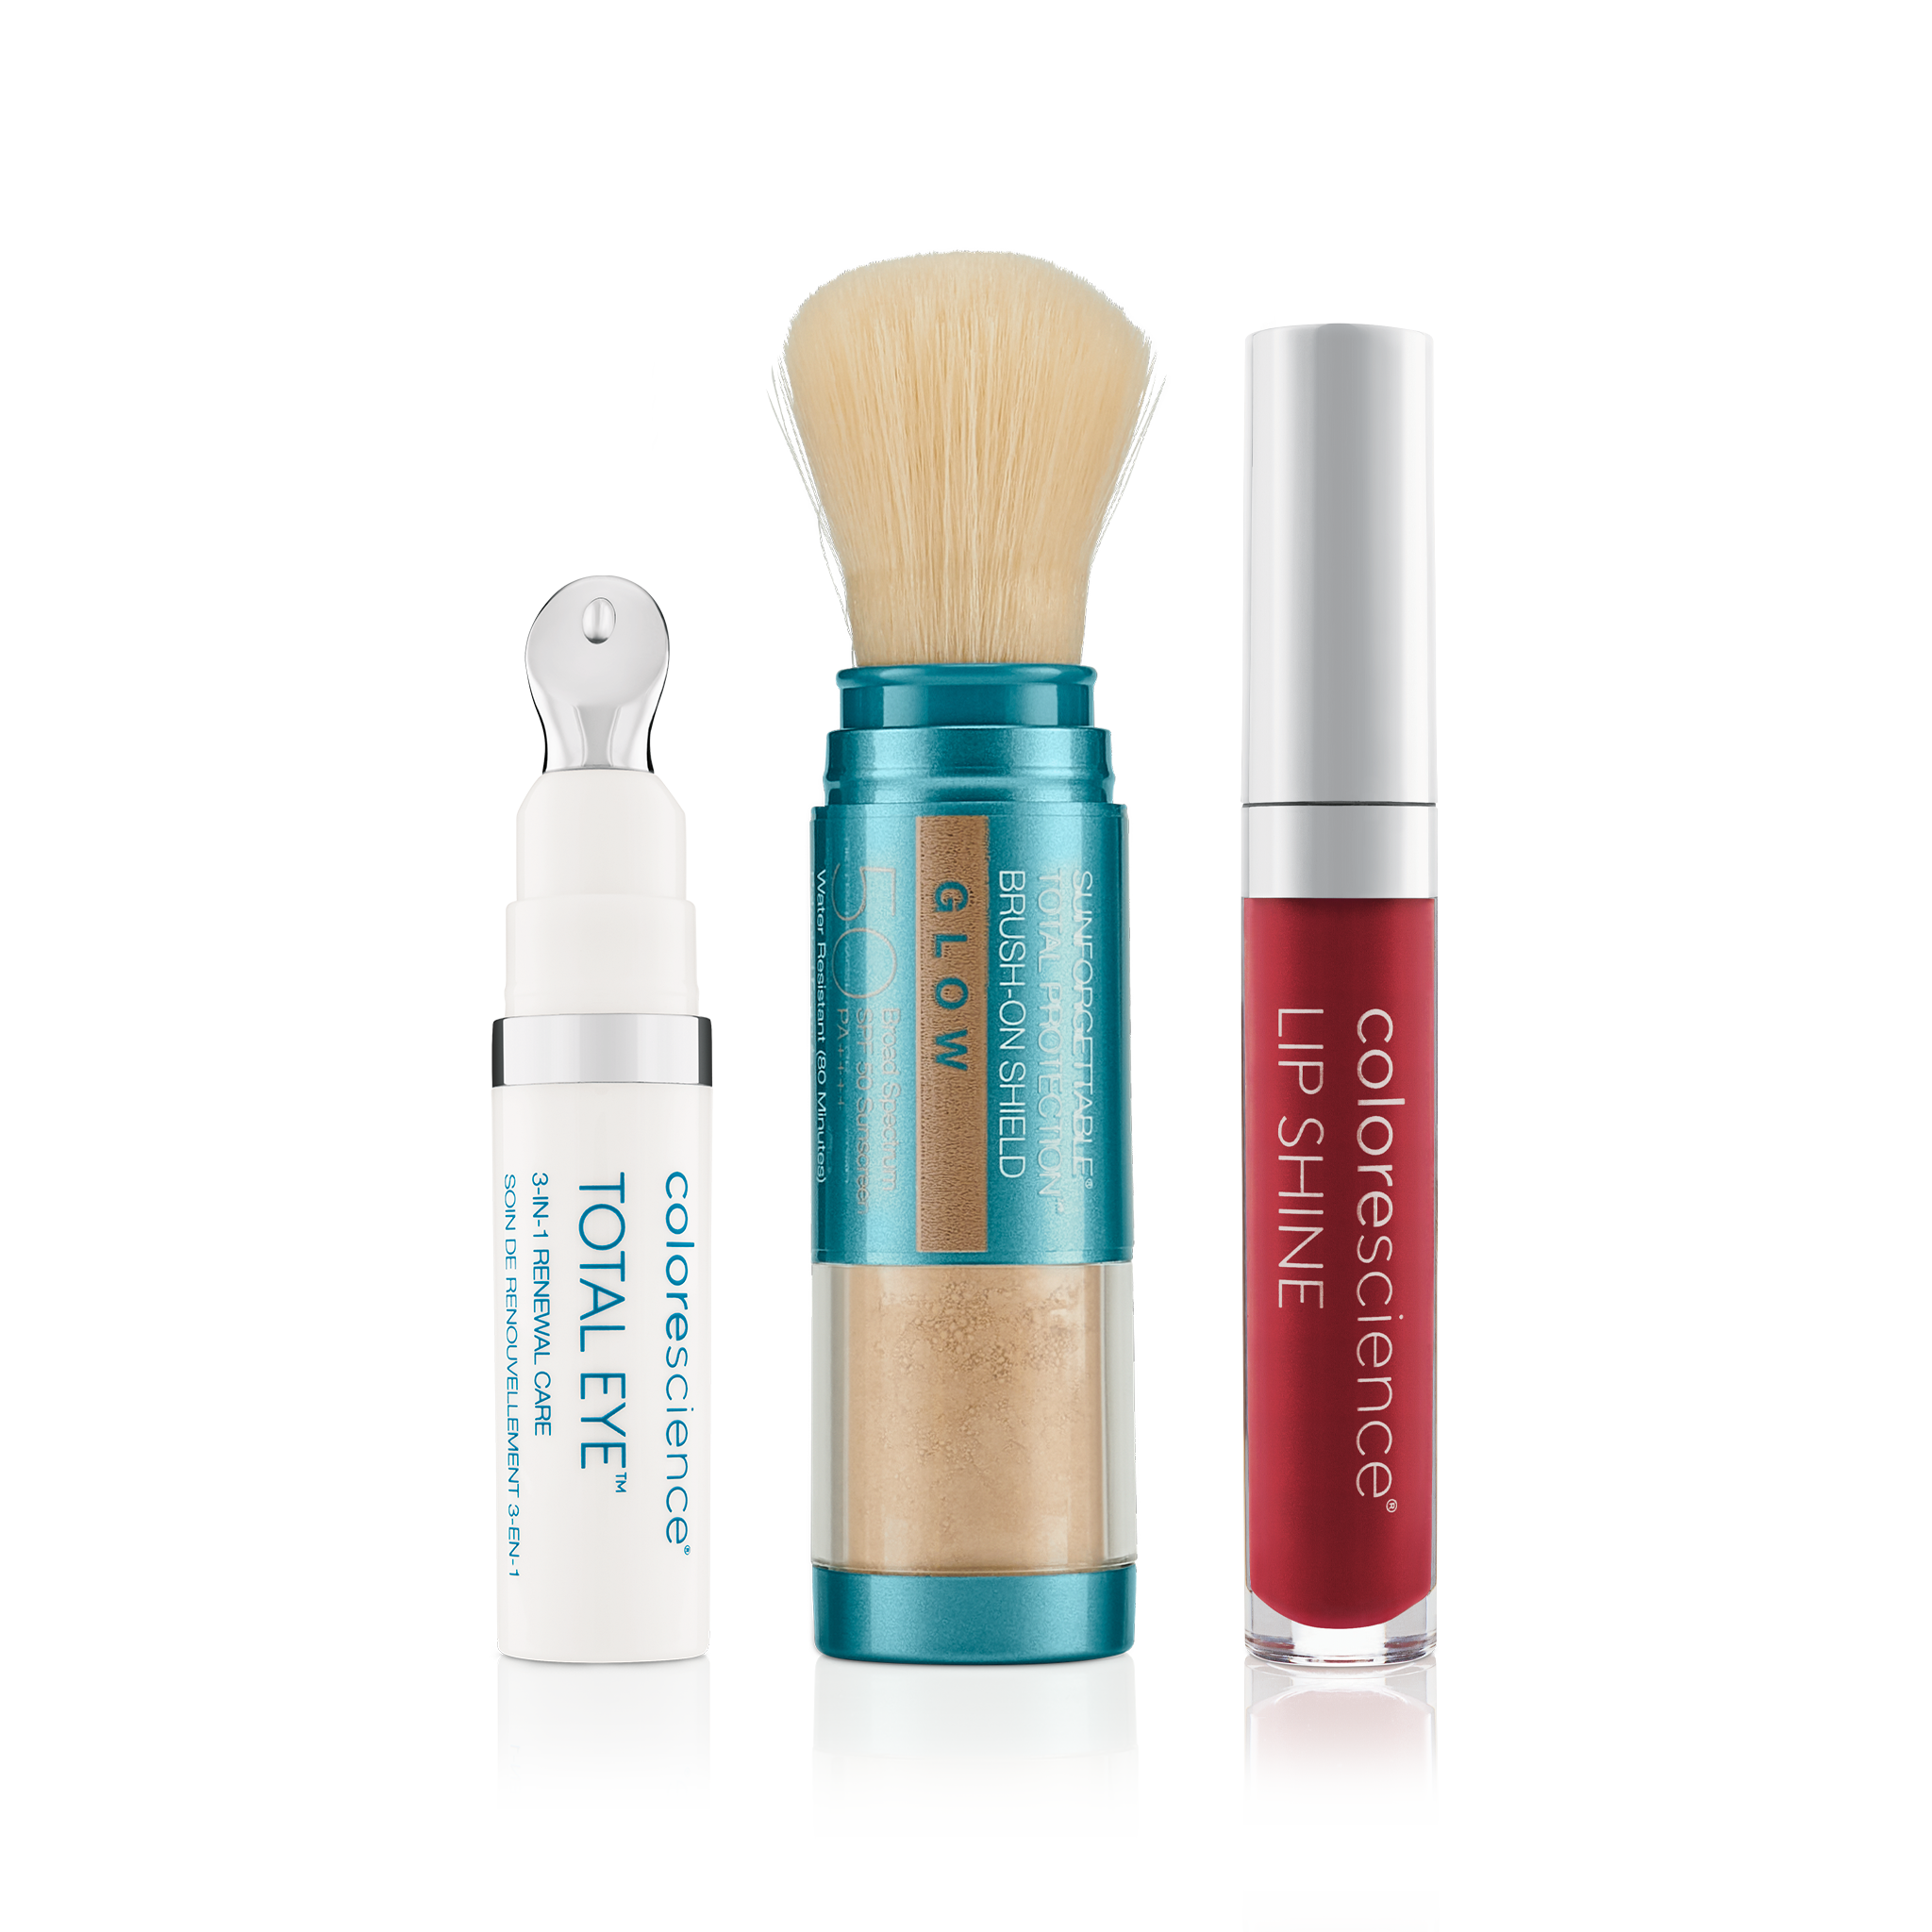 Total Eye 3-in-1 Renewal Therapy SPF 35, Sunforgettable Total Protection Brush-On Shield Glow SPF 50, Lip Shine SPF 35 Scarlet || all